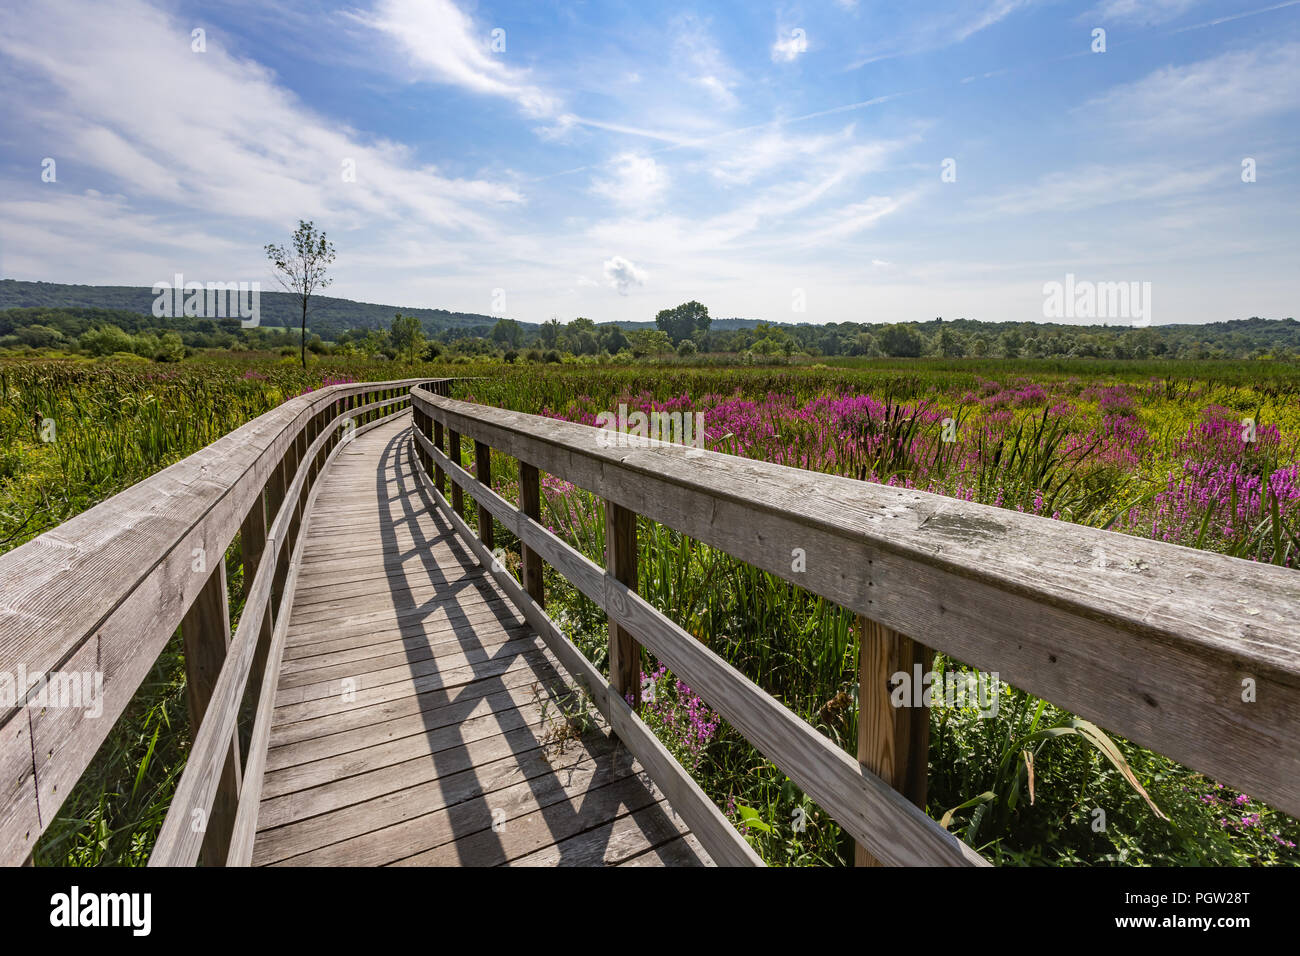 Section of the Appalachian Trail boardwalk in Pawling, New York Stock Photo